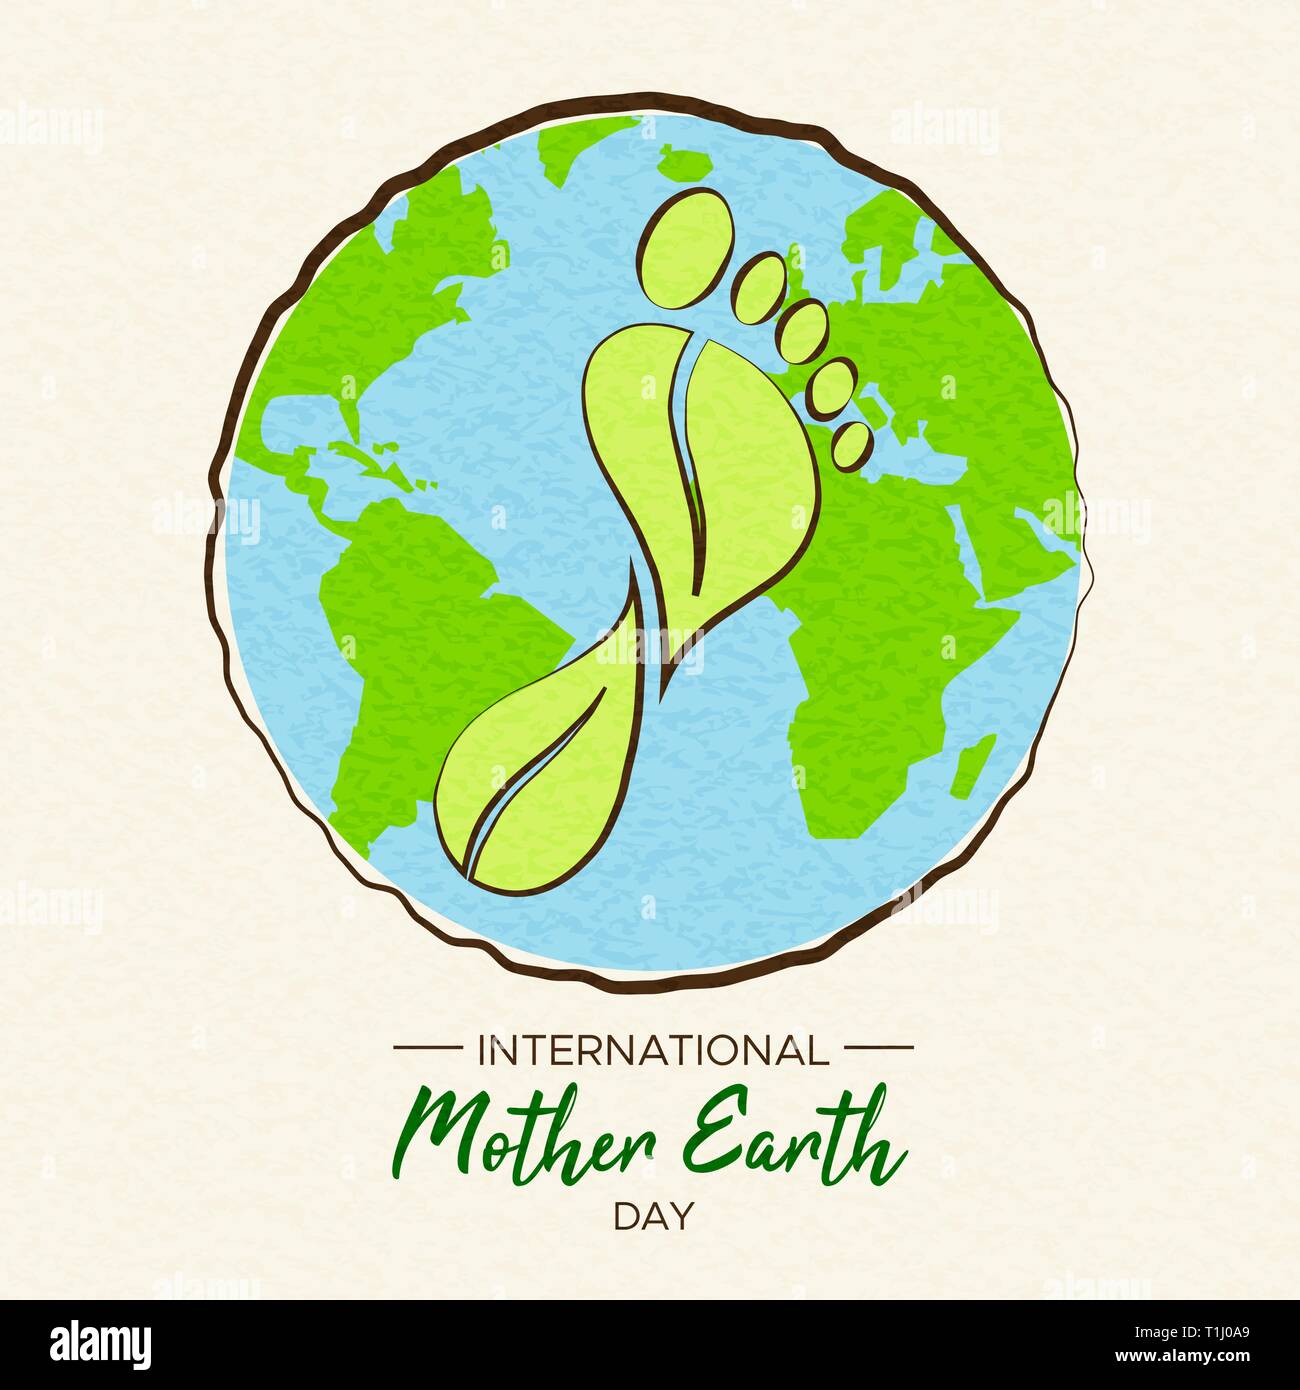 International Earth Day illustration of carbon footprint concept. Green planet and foot shape for environment care. Stock Vector